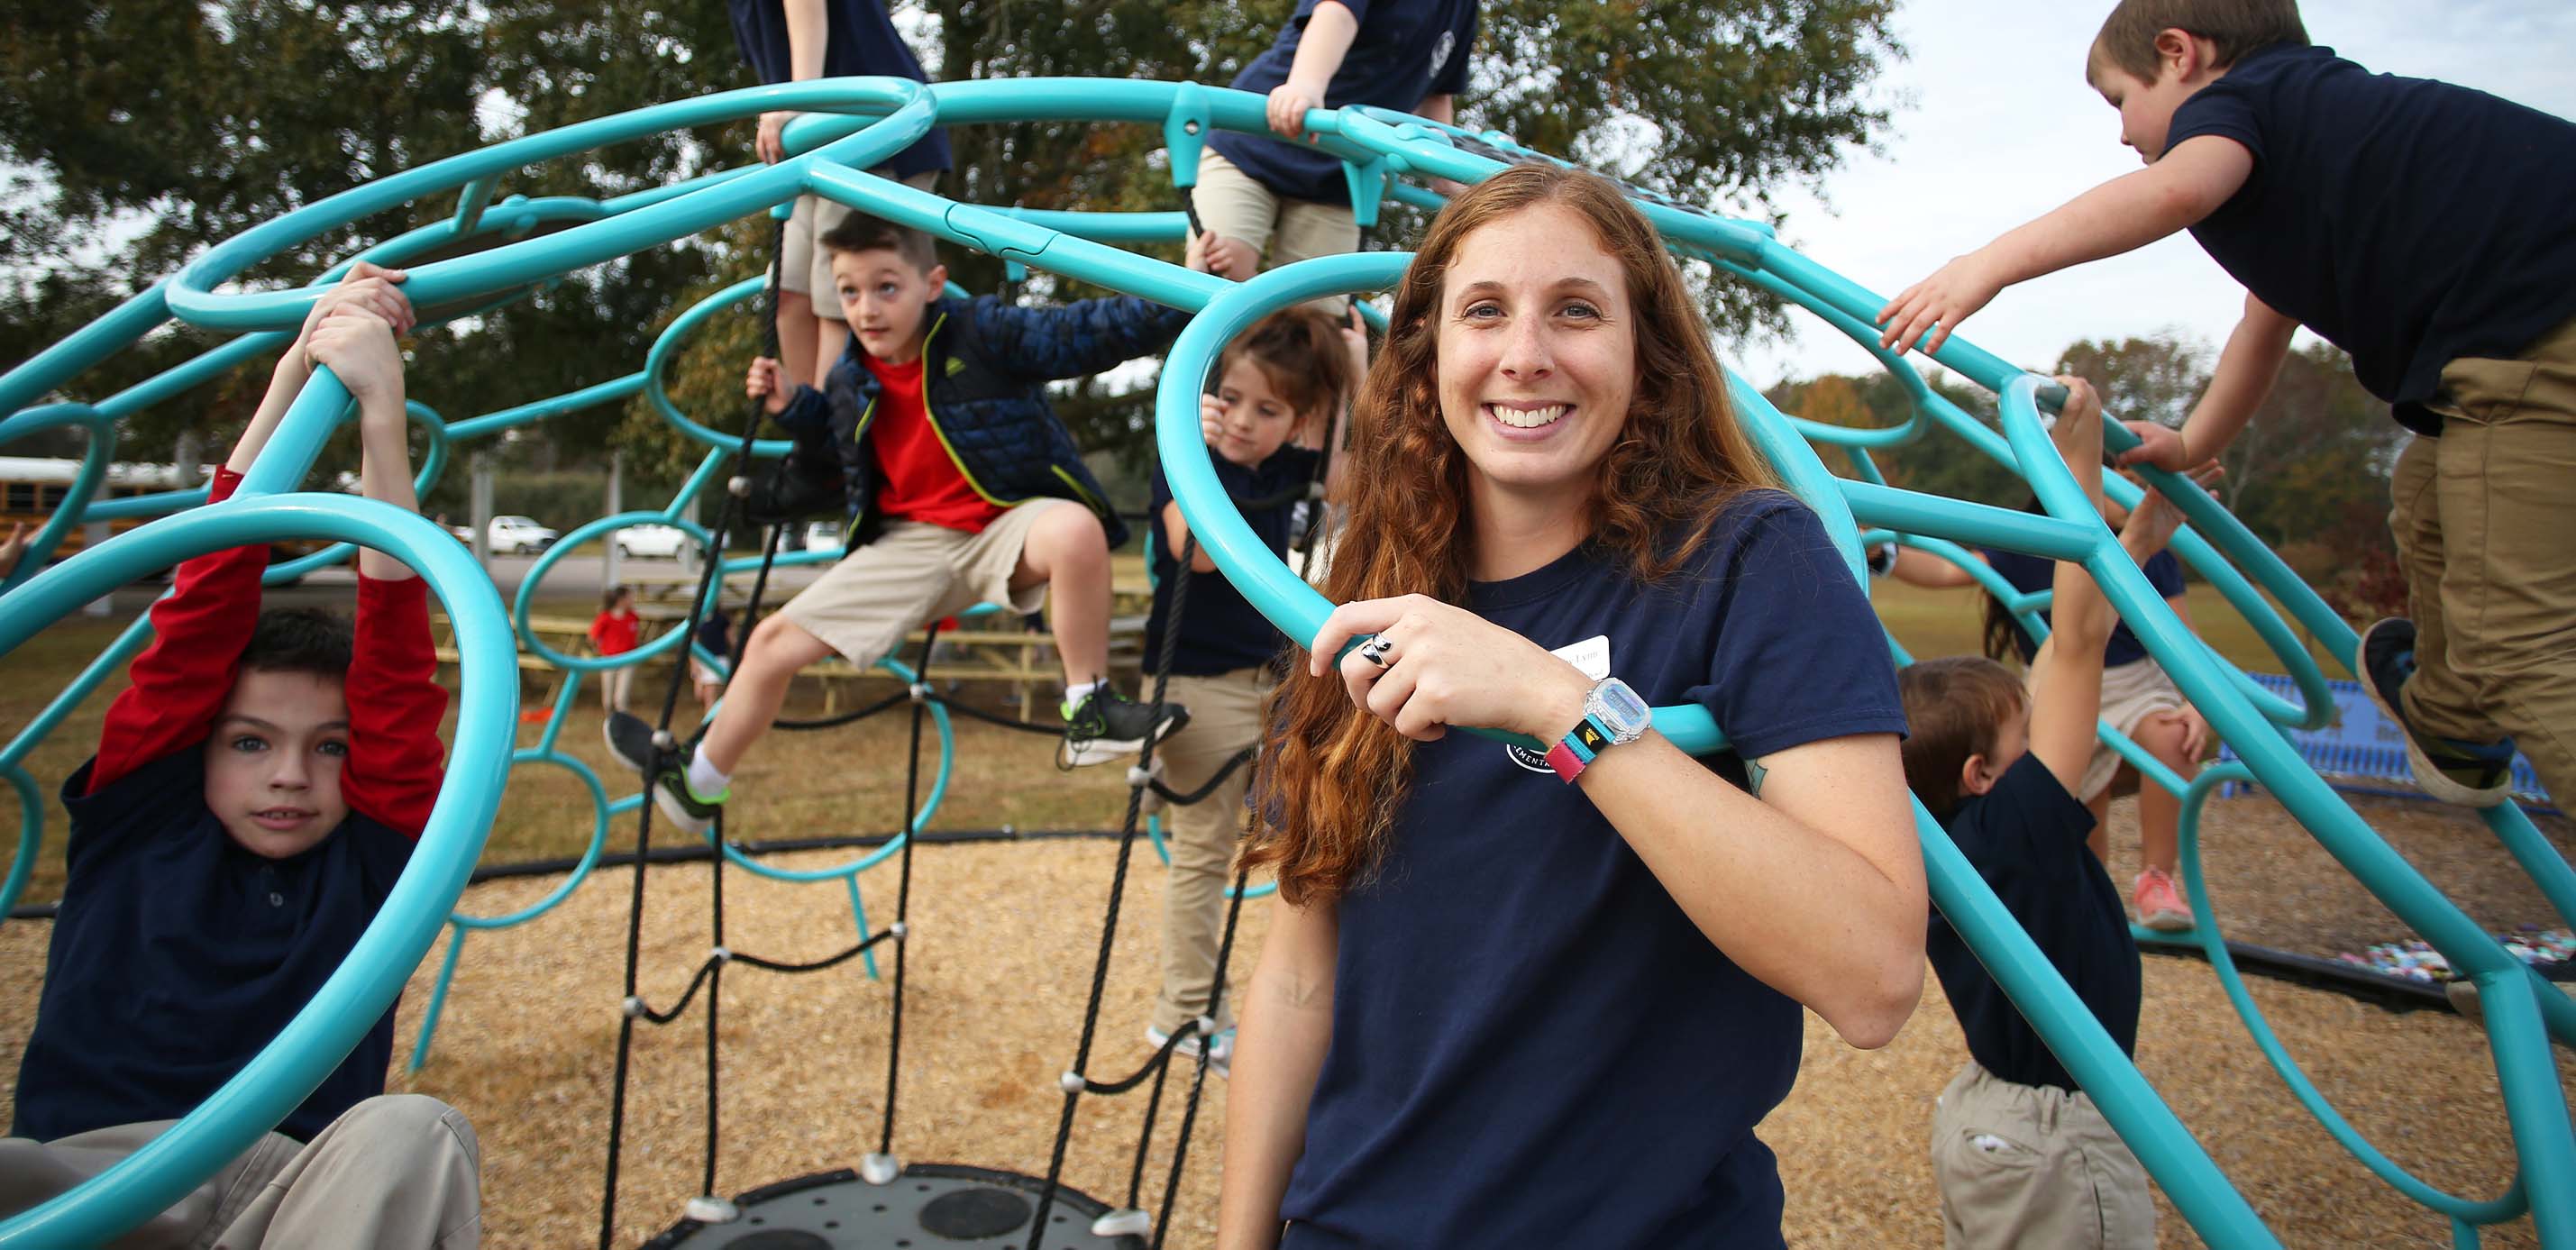 Physical education, also known as “P.E.” in K-12 schools, is much more than recess. Shelby Lynn, who will receive her master of education in physical education from the University of South Alabama in December 2019, wants people to know that P.E. classes involve standards that progressively build motor skills, movement characteristics, fitness and social responsibility. data-lightbox='featured'